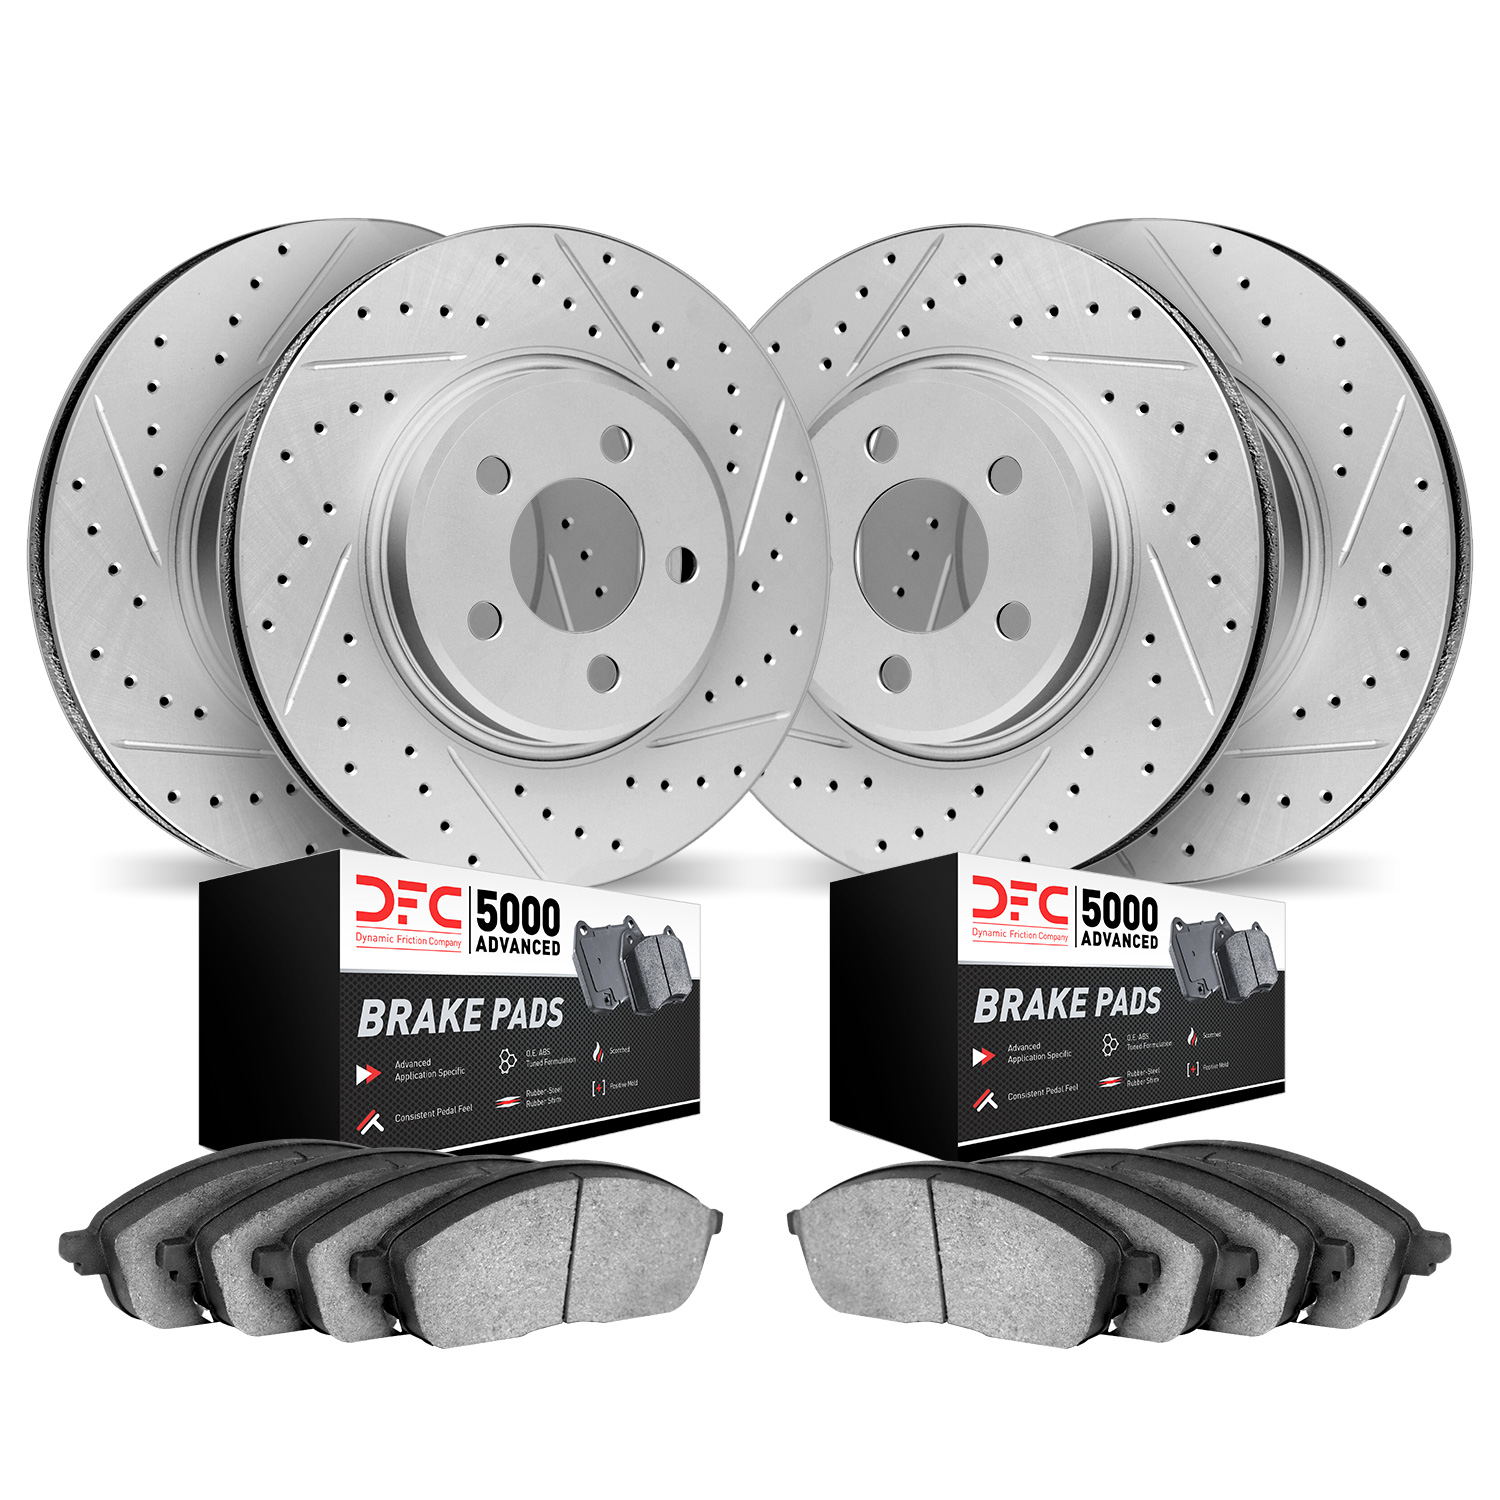 2504-74039 Geoperformance Drilled/Slotted Rotors w/5000 Advanced Brake Pads Kit, 2011-2014 Porsche, Position: Front and Rear